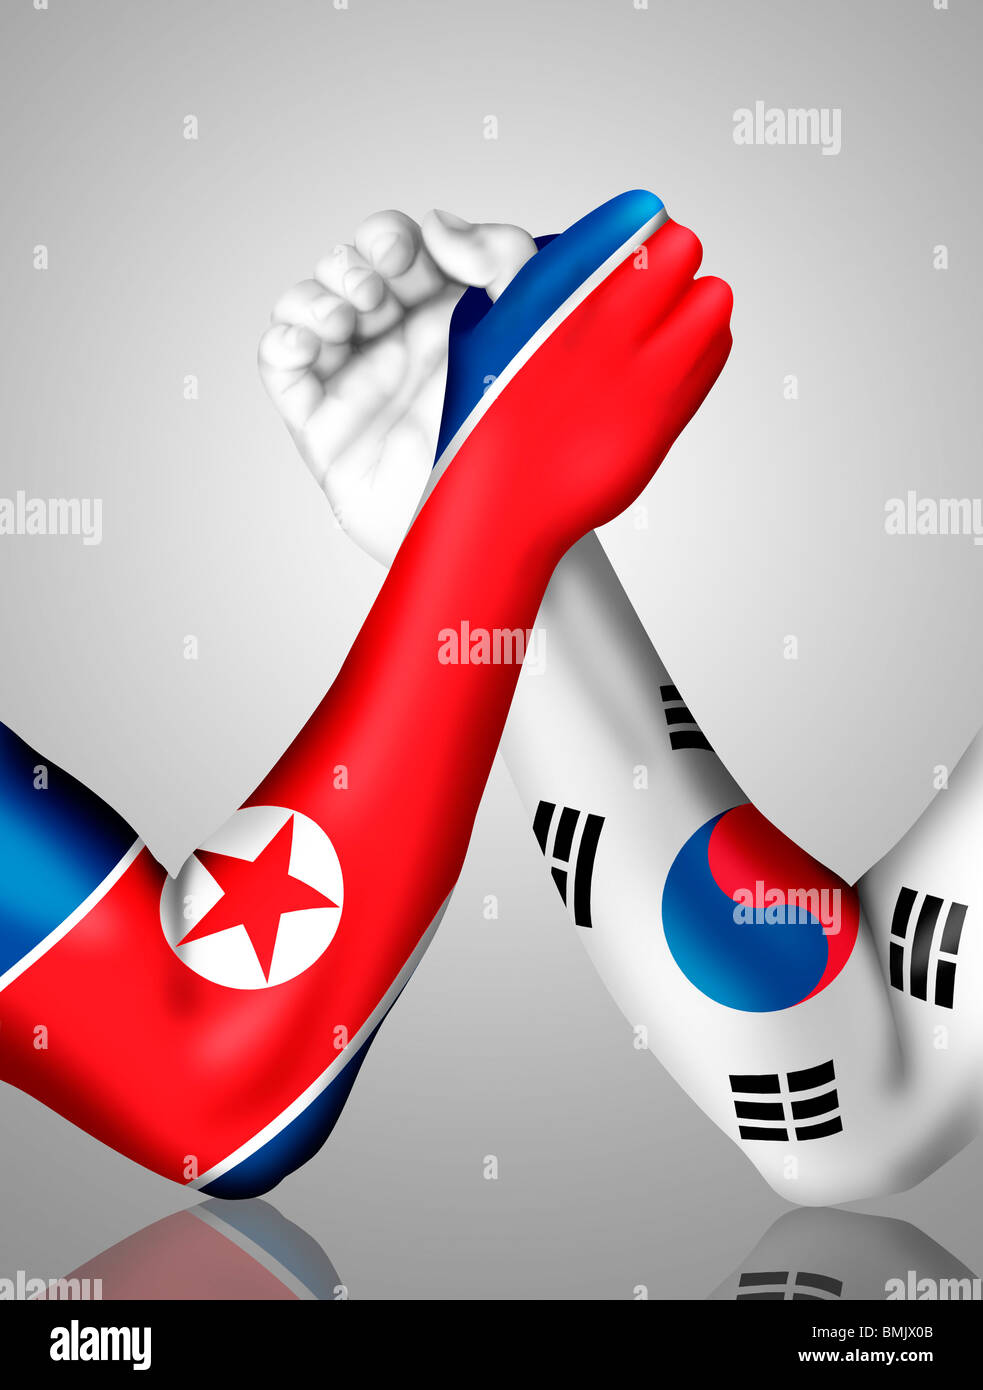 Arm wrestling between North and South Korea Stock Photo